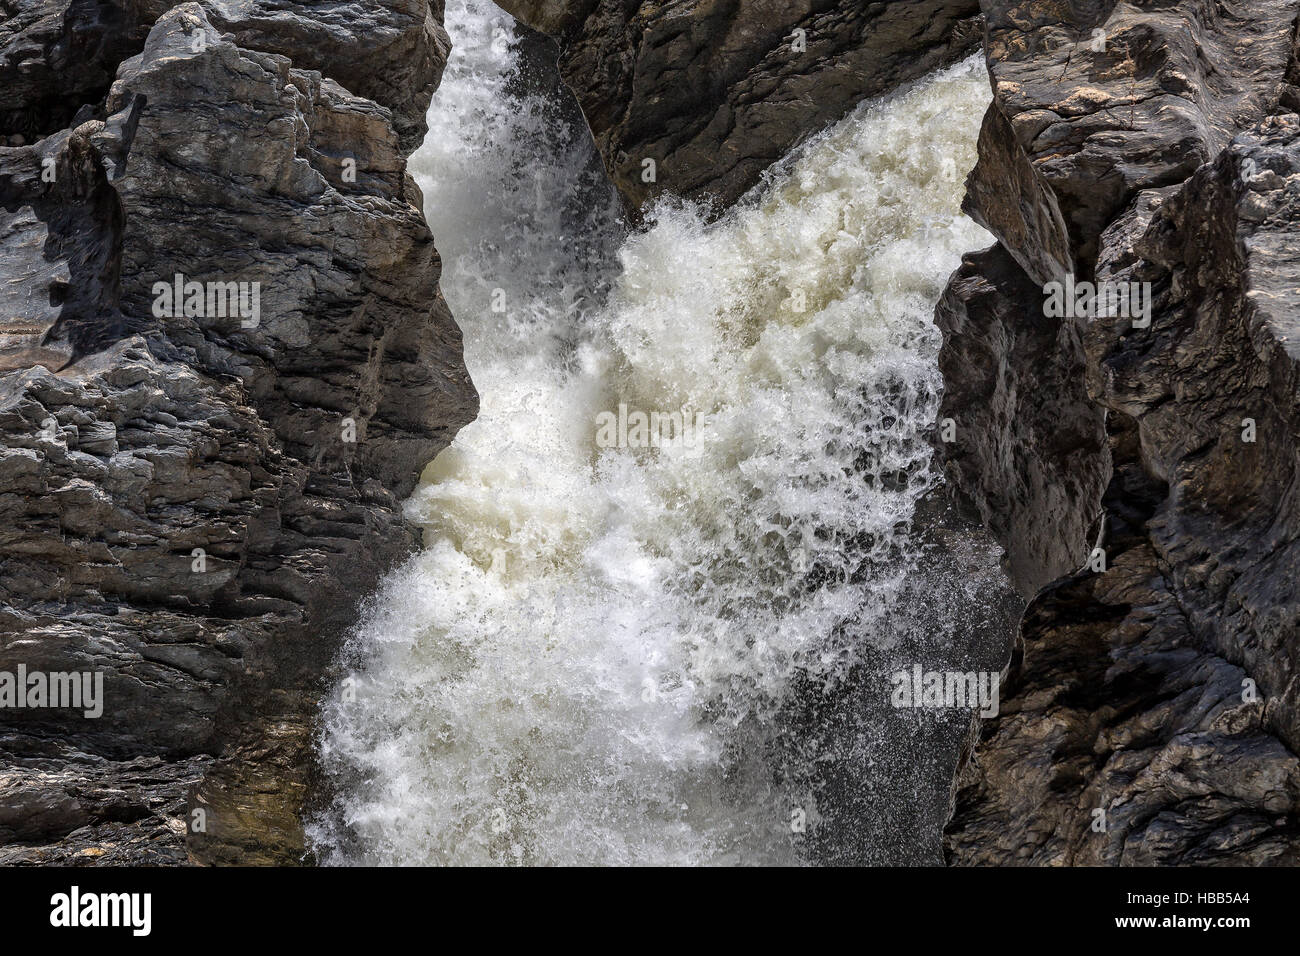 Waterfall Flowing Between the Lava Stones Stock Photo